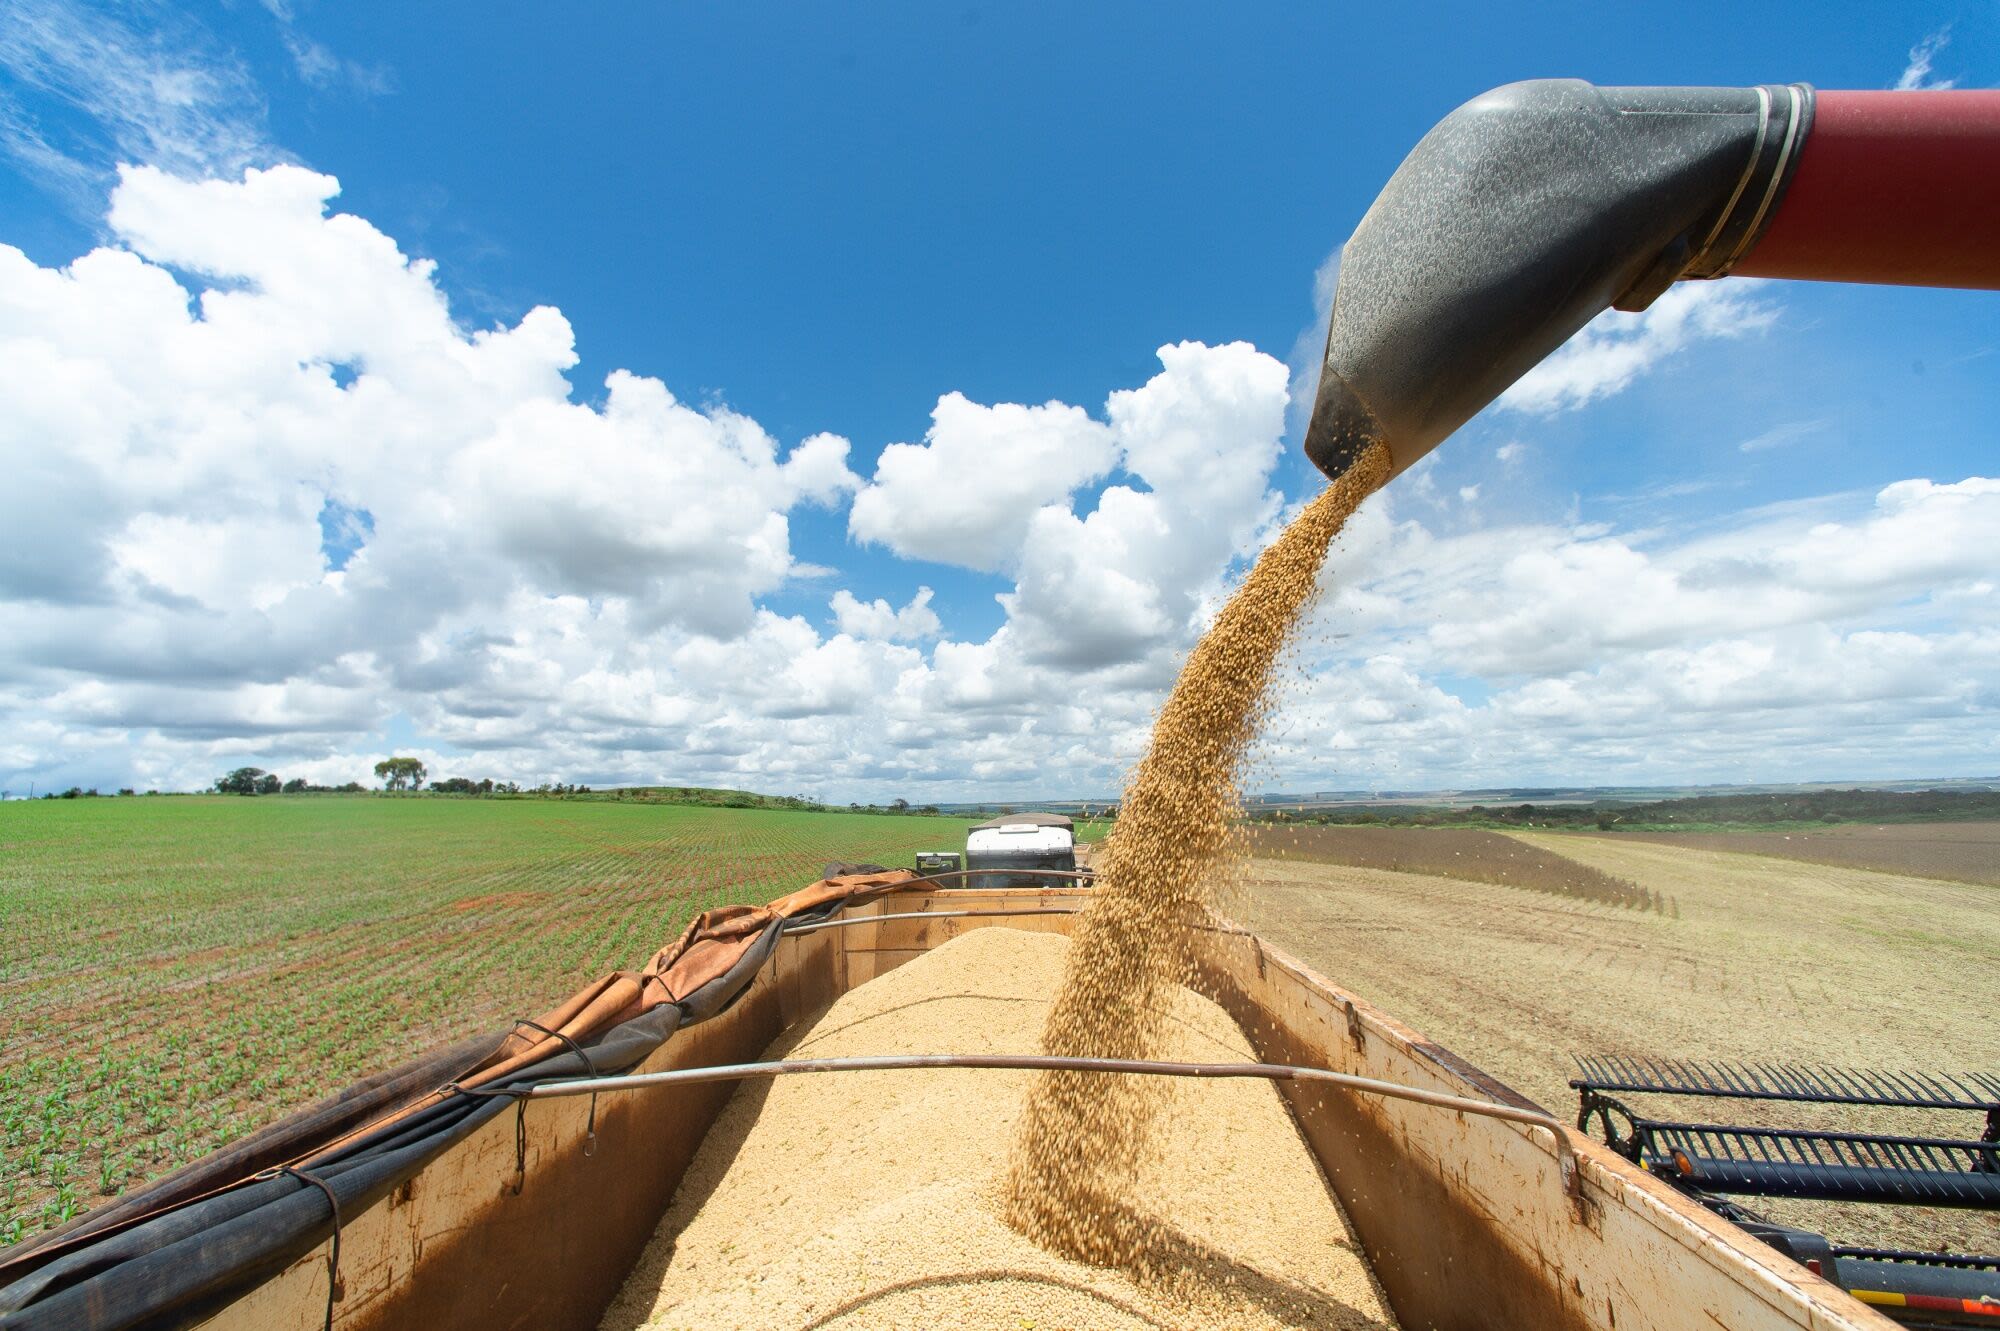 Surprise Tax Change Upends Trading in Crop Powerhouse Brazil